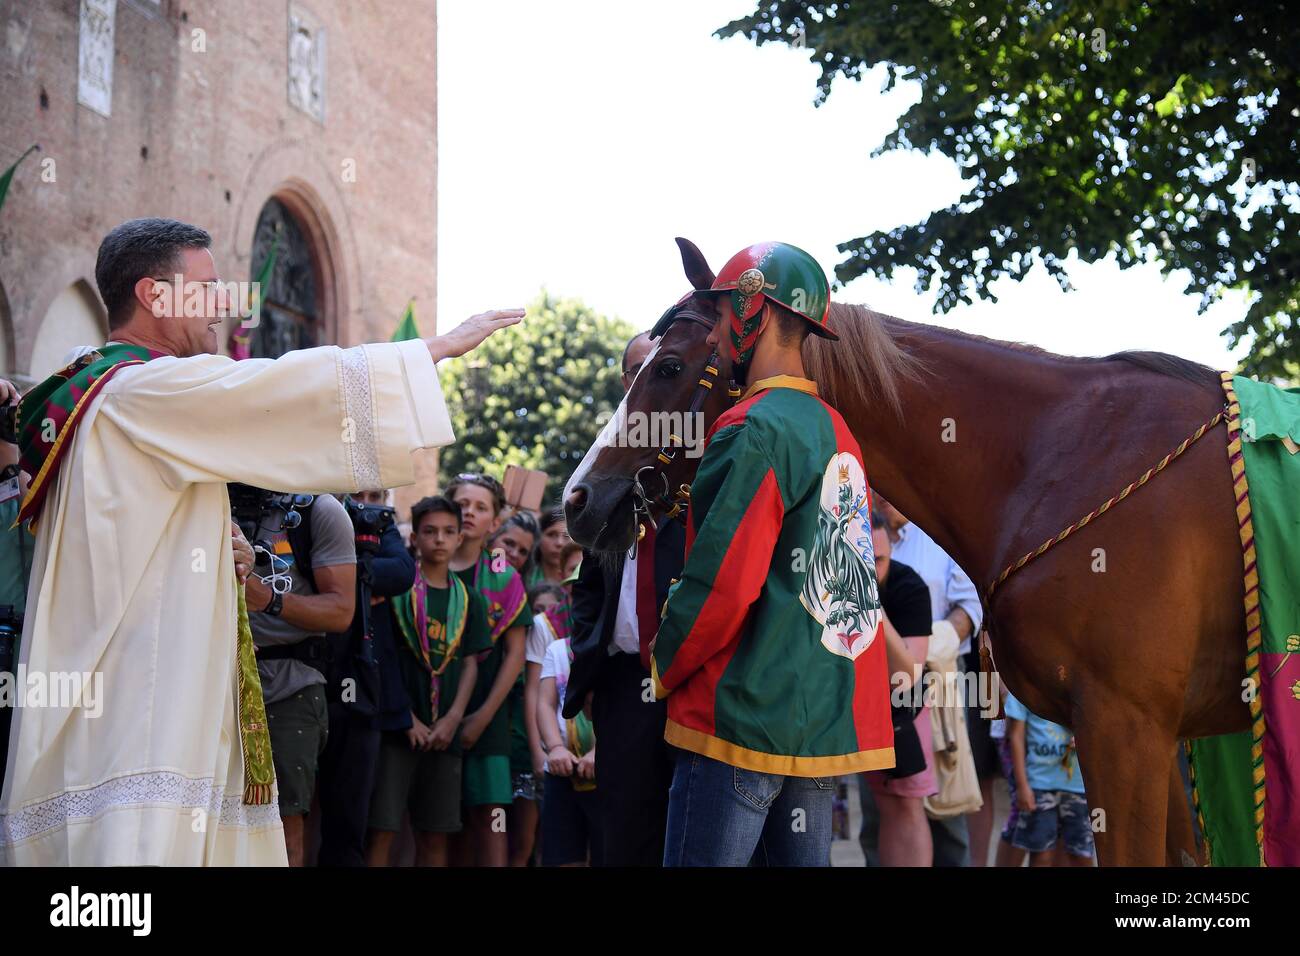 The horse 'Remorex' and its jockey Federico Arri, also known as 'Ares',  from La Contrada del Drago, get a blessing from priest Alfredo Scarciglia  before the traditional annual horse race Palio di